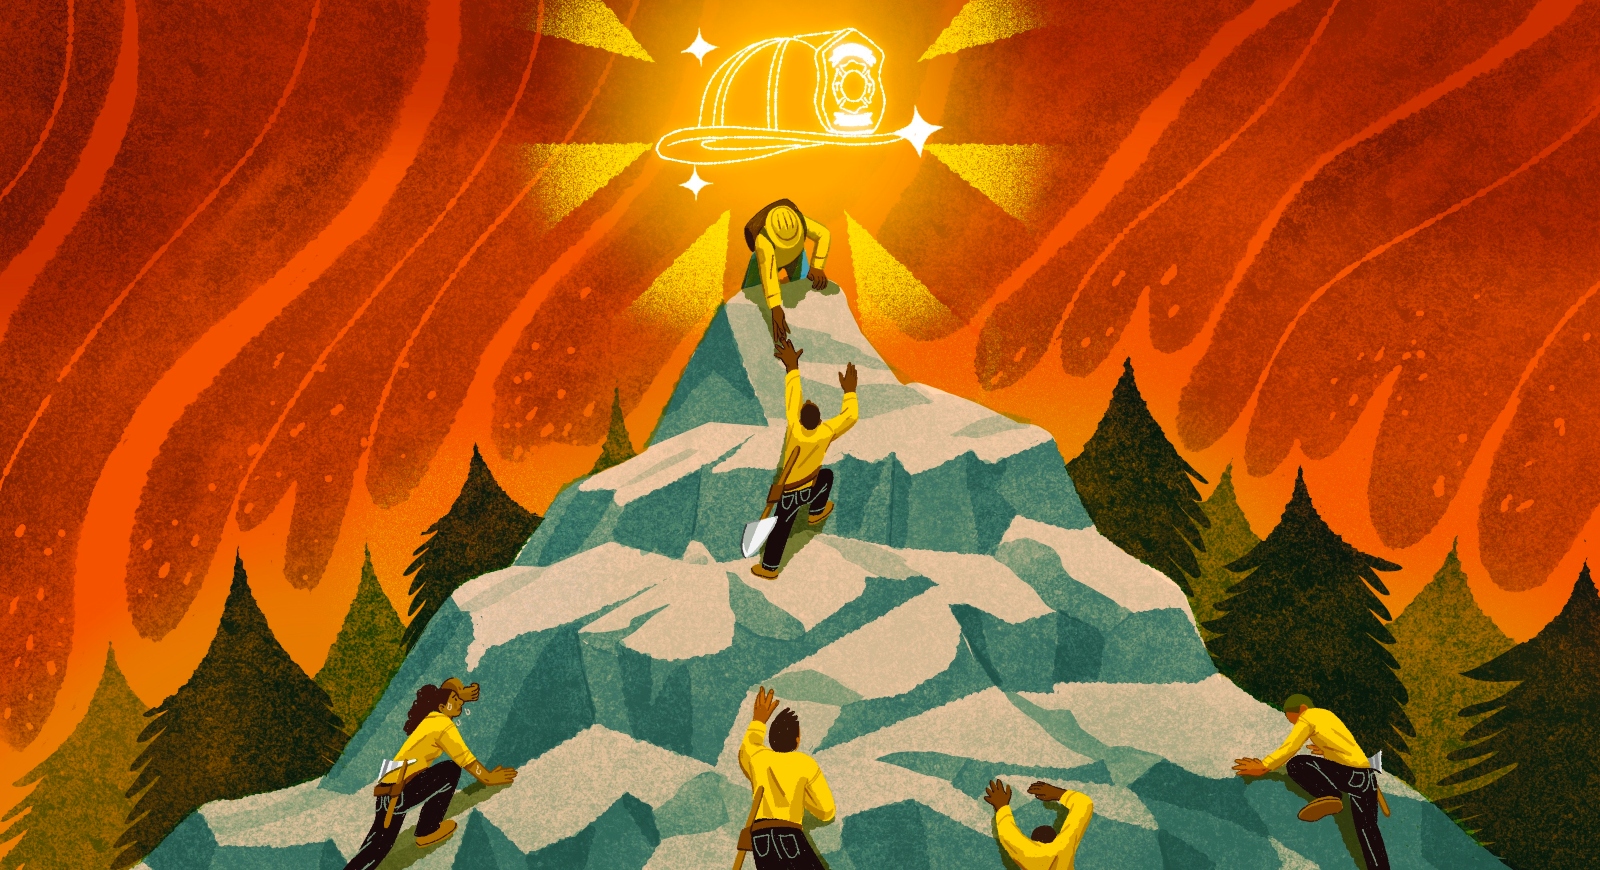 Firefighters climbing a hill illustration